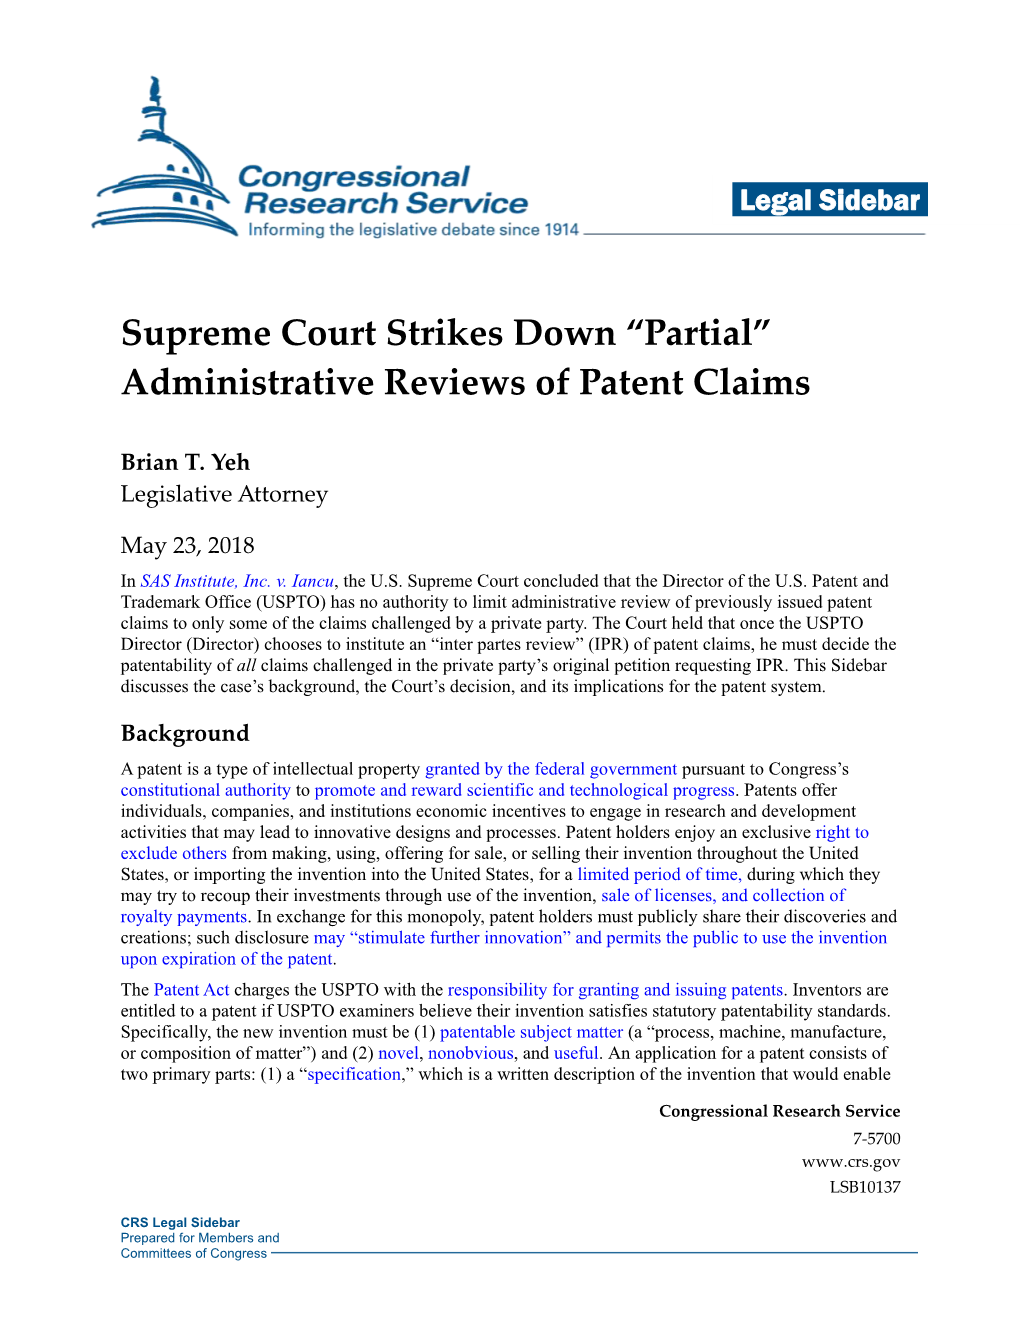 Supreme Court Strikes Down "Partial" Administrative Reviews of Patent